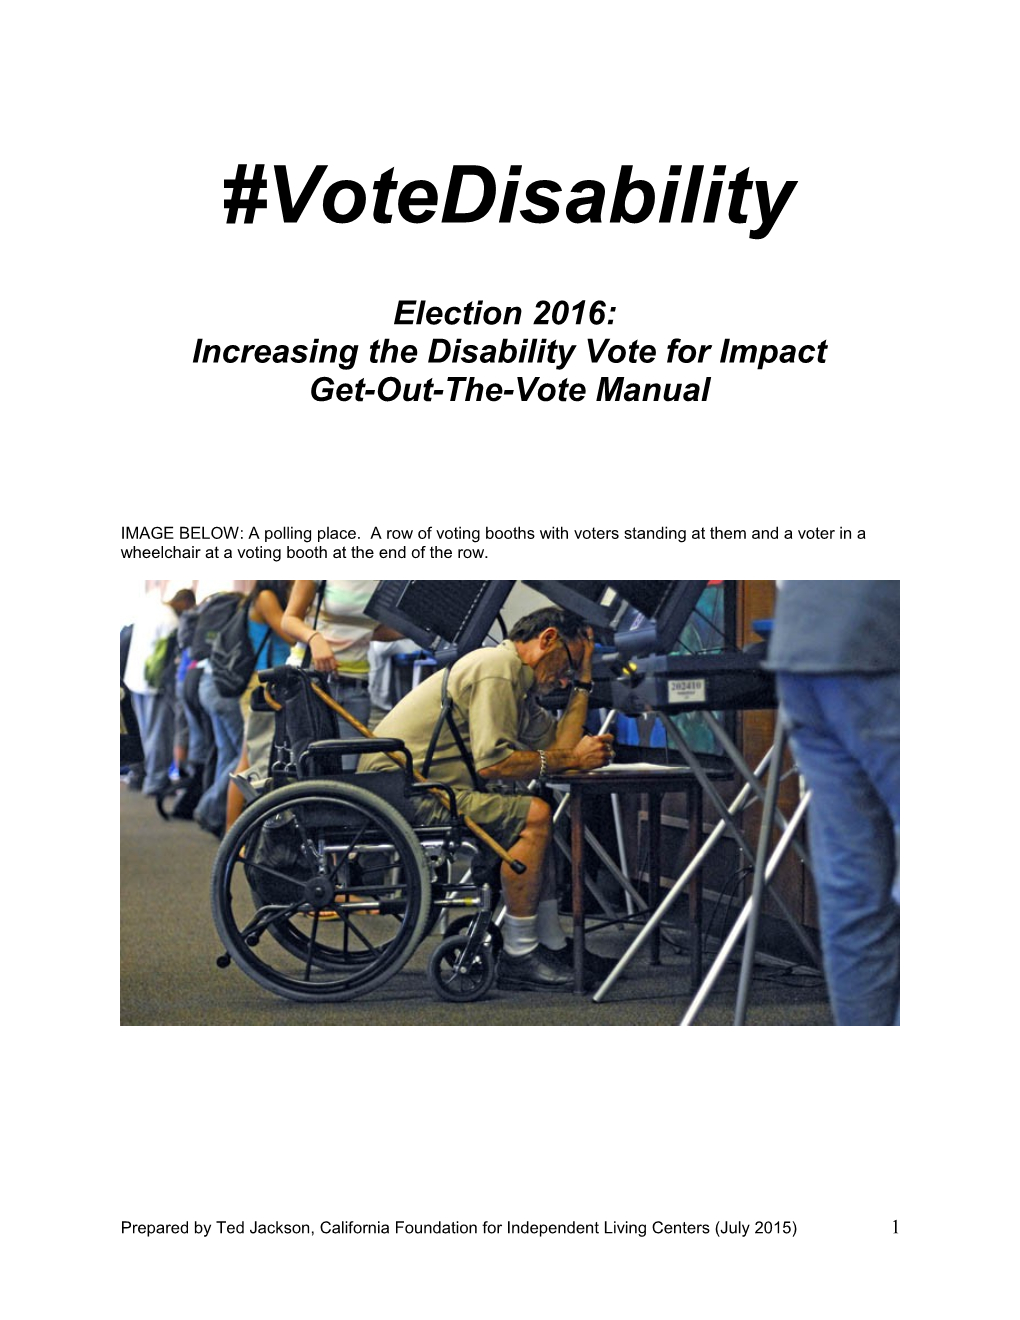 Increasing the Disability Vote for Impact